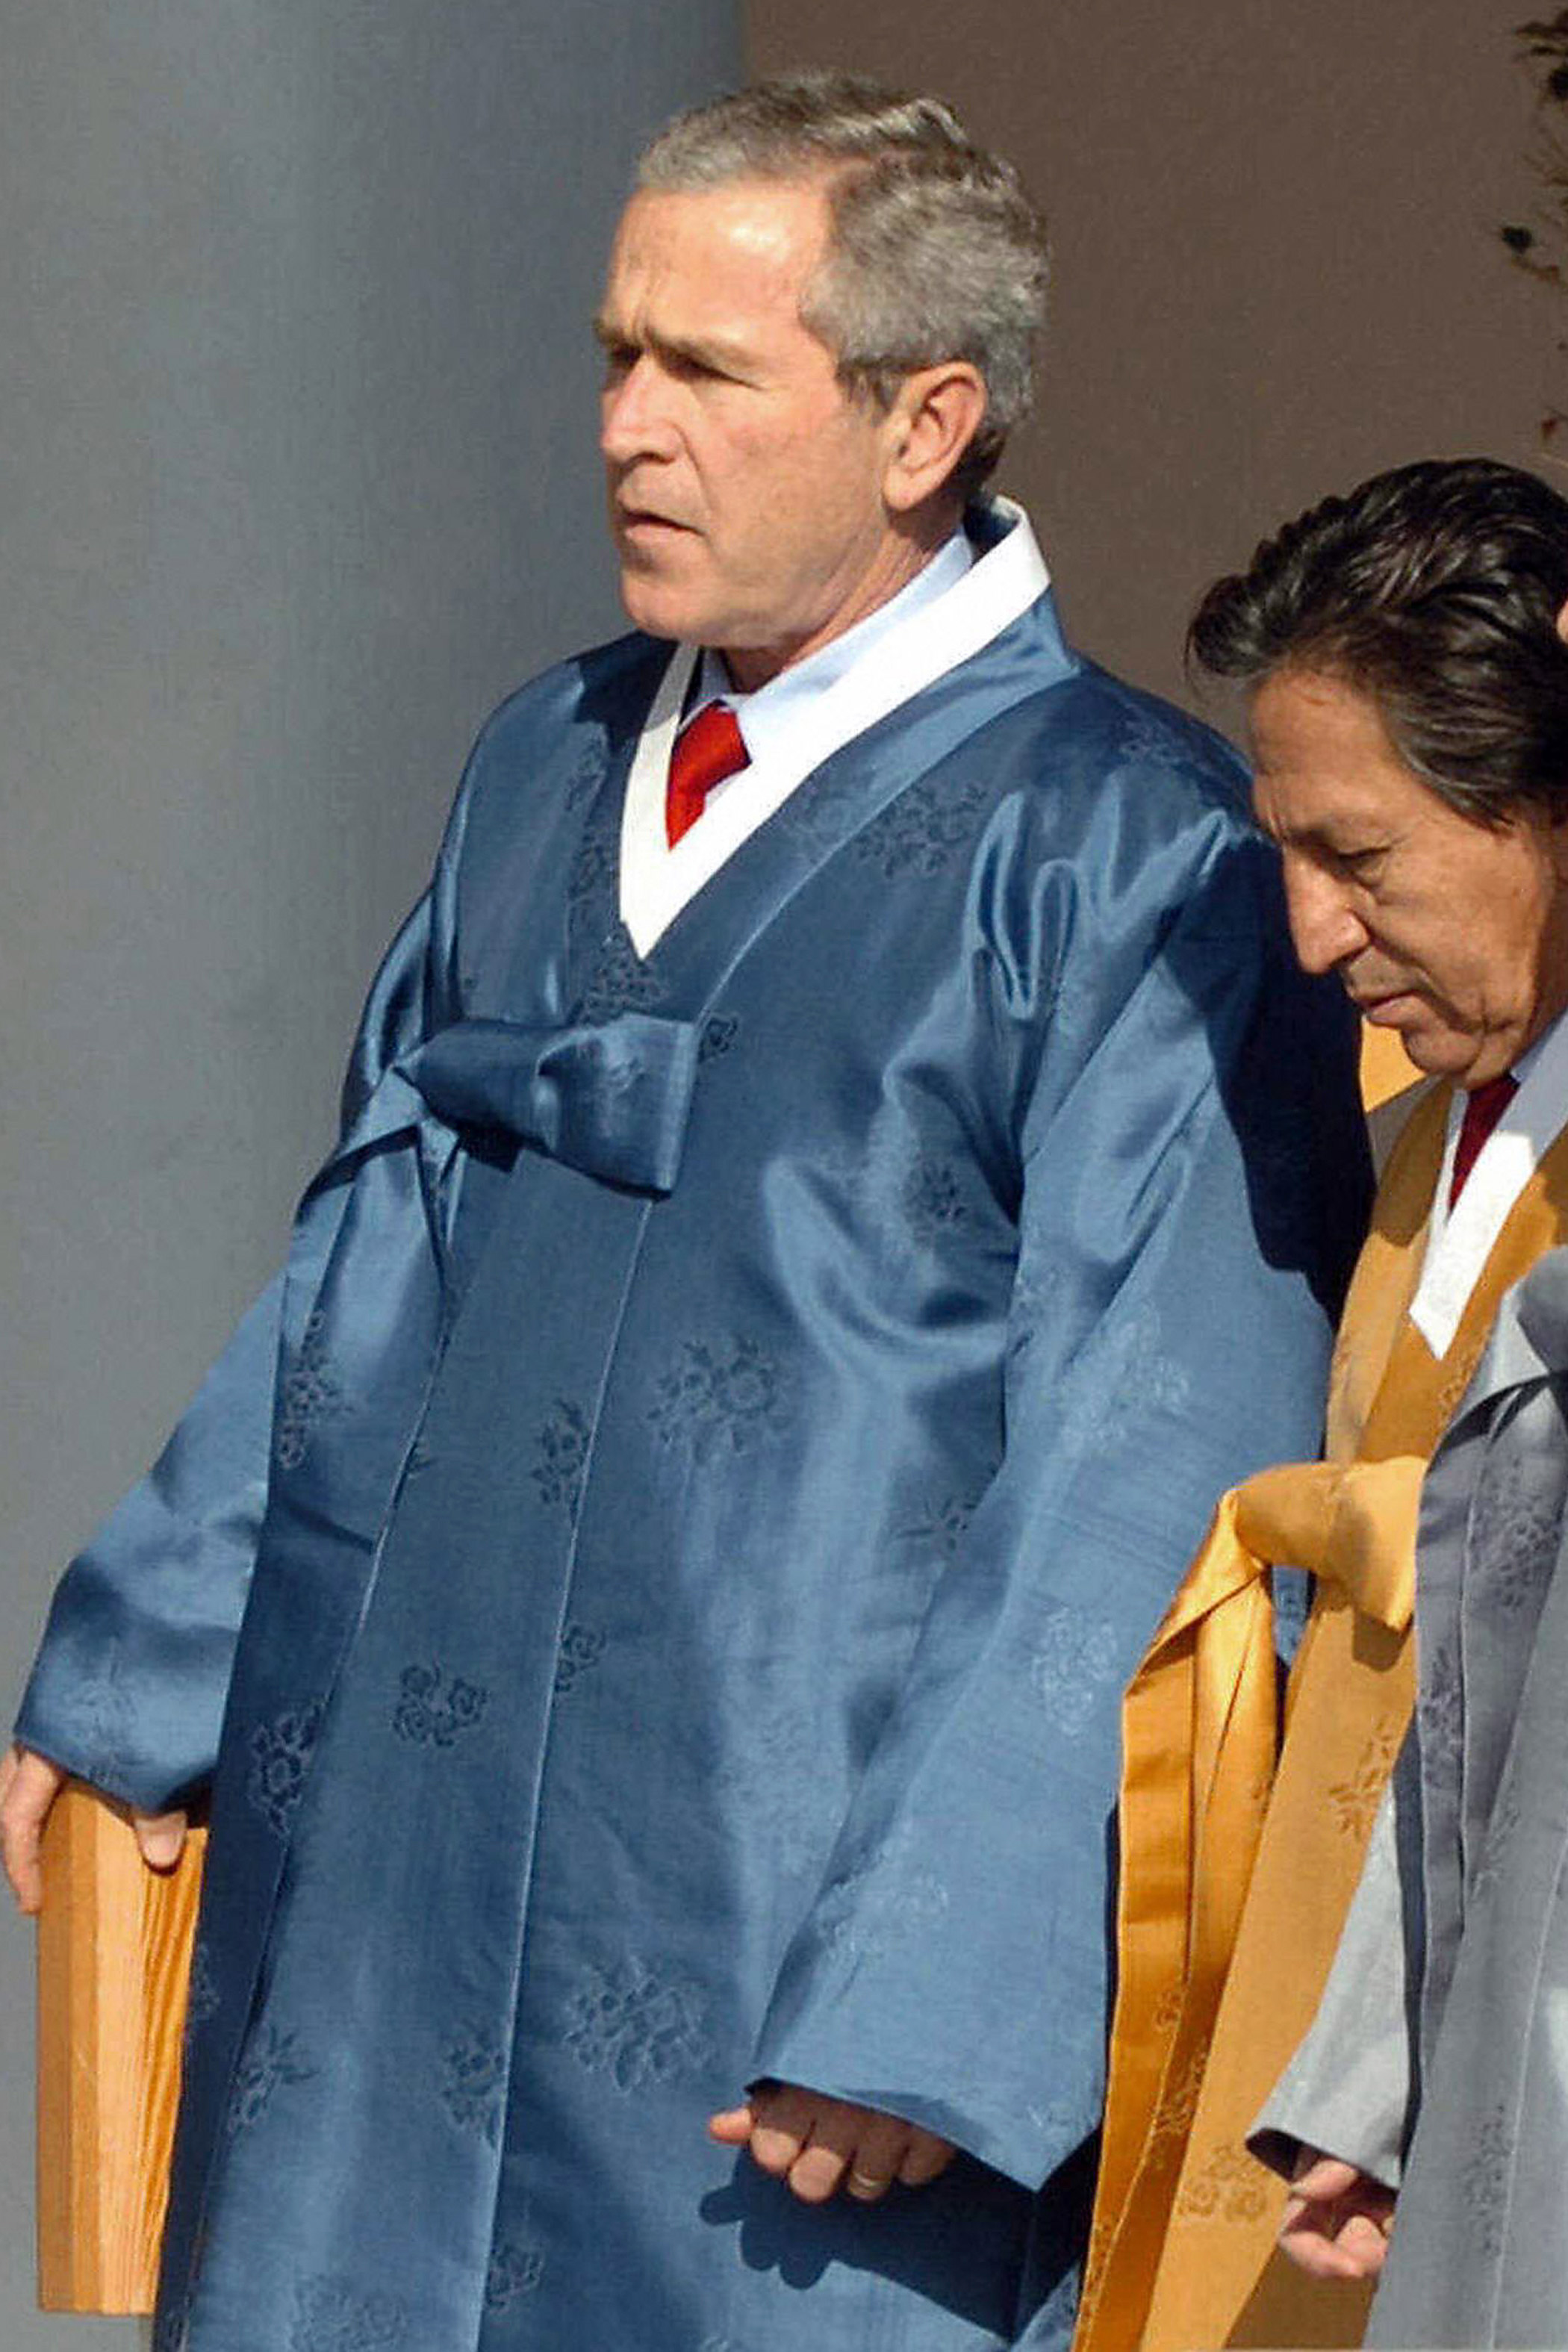 Clad in traditional South Korean outfits, U.S. President George W. Bush and Peruvian President Alejandro Toledo proceed to a photo session during the APEC Summit in Pusan, South Korea on Nov. 19, 2005.